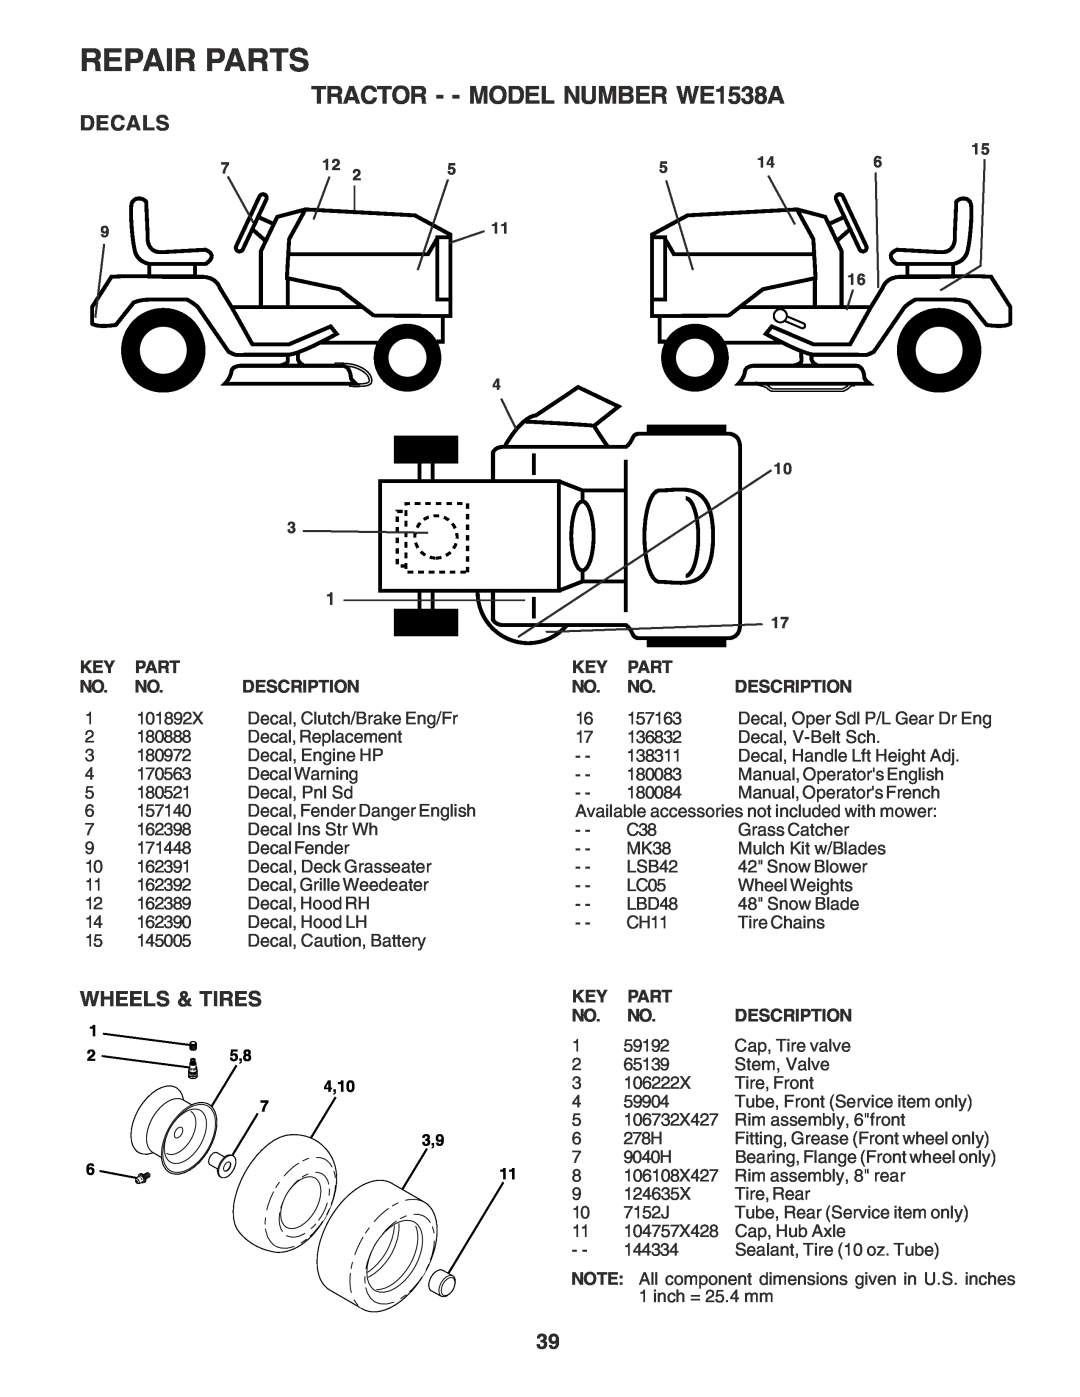 Weed Eater manual Decals, Wheels & Tires, Repair Parts, TRACTOR - - MODEL NUMBER WE1538A, 25,8 4,10 